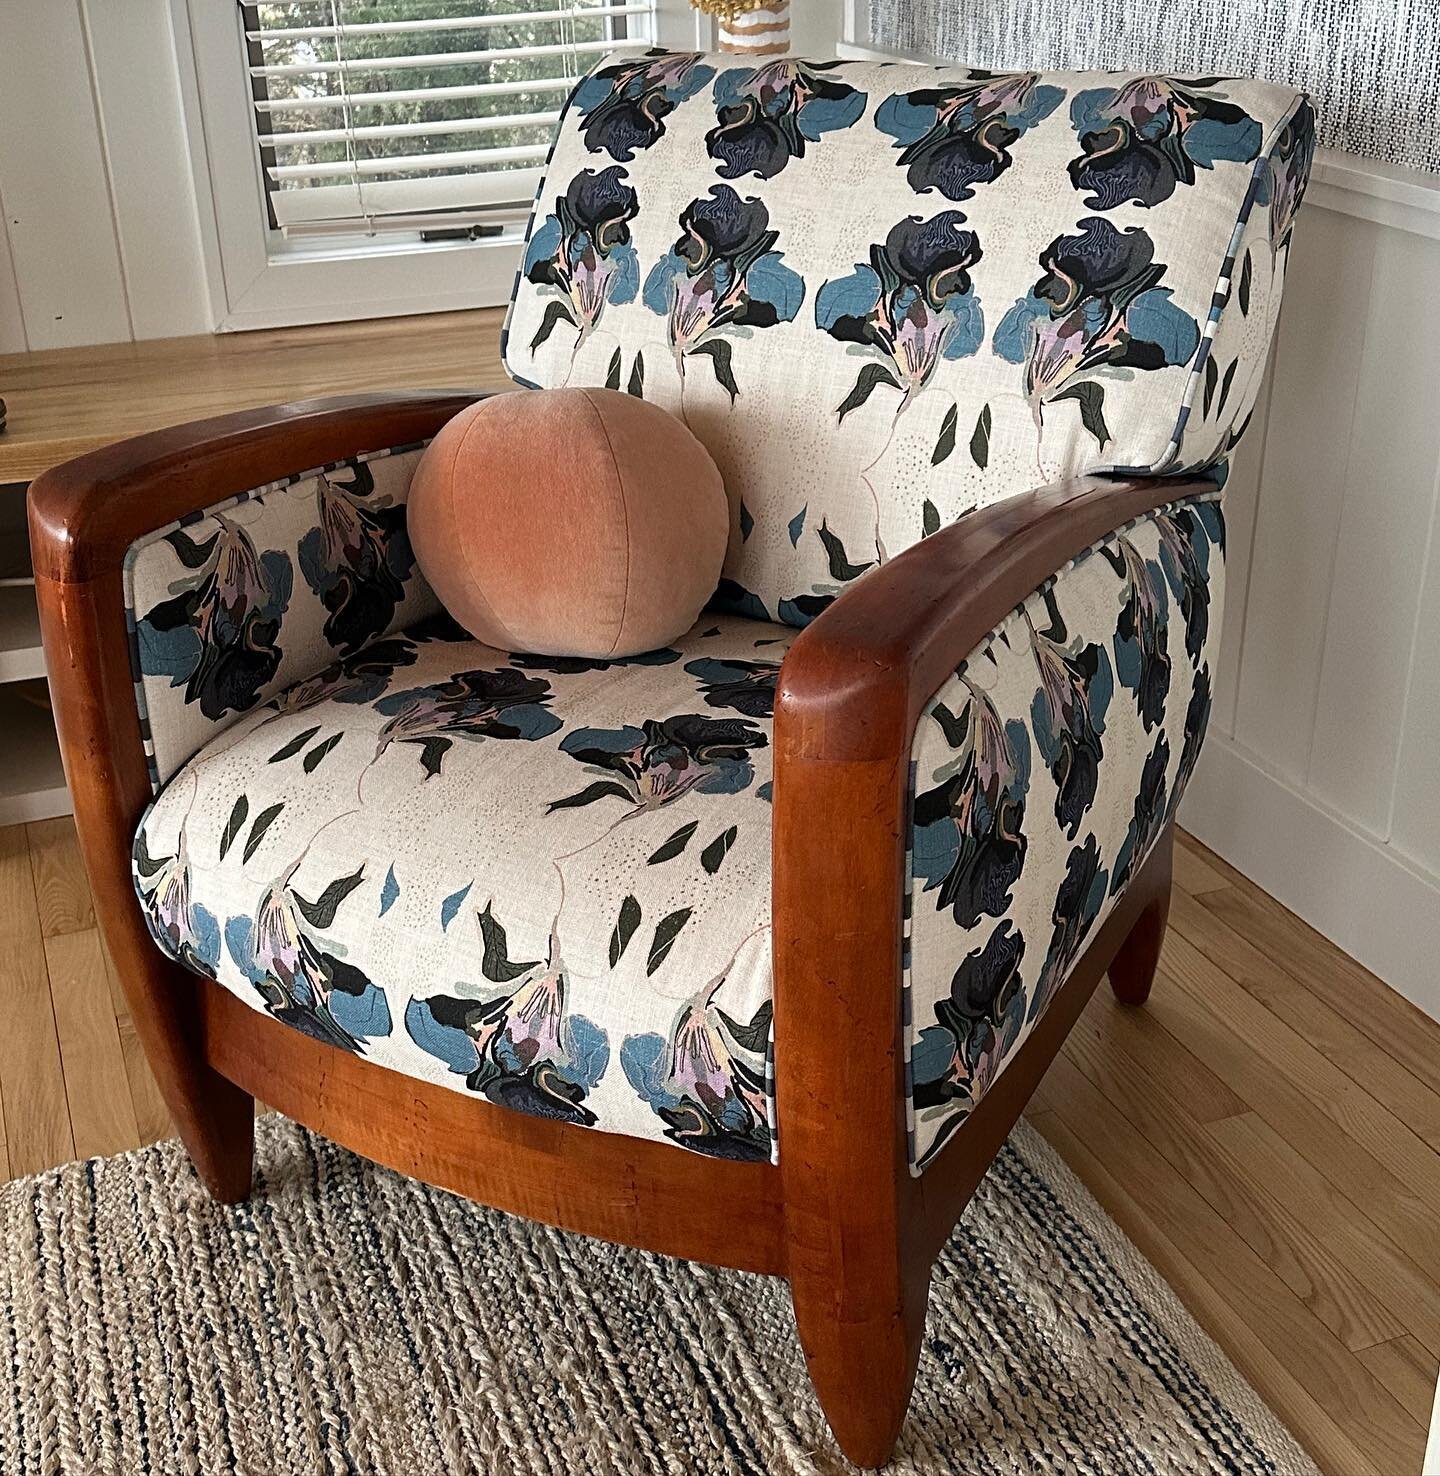 Custom Mission style chair with Dragon Flower Upholstery by @kristy_stafford 

#customfurniture #custommade #interiordesign #interiorstyle #upholsteredfurniture #chicagointeriordesign #chicagomade #missionaccomplished✔️